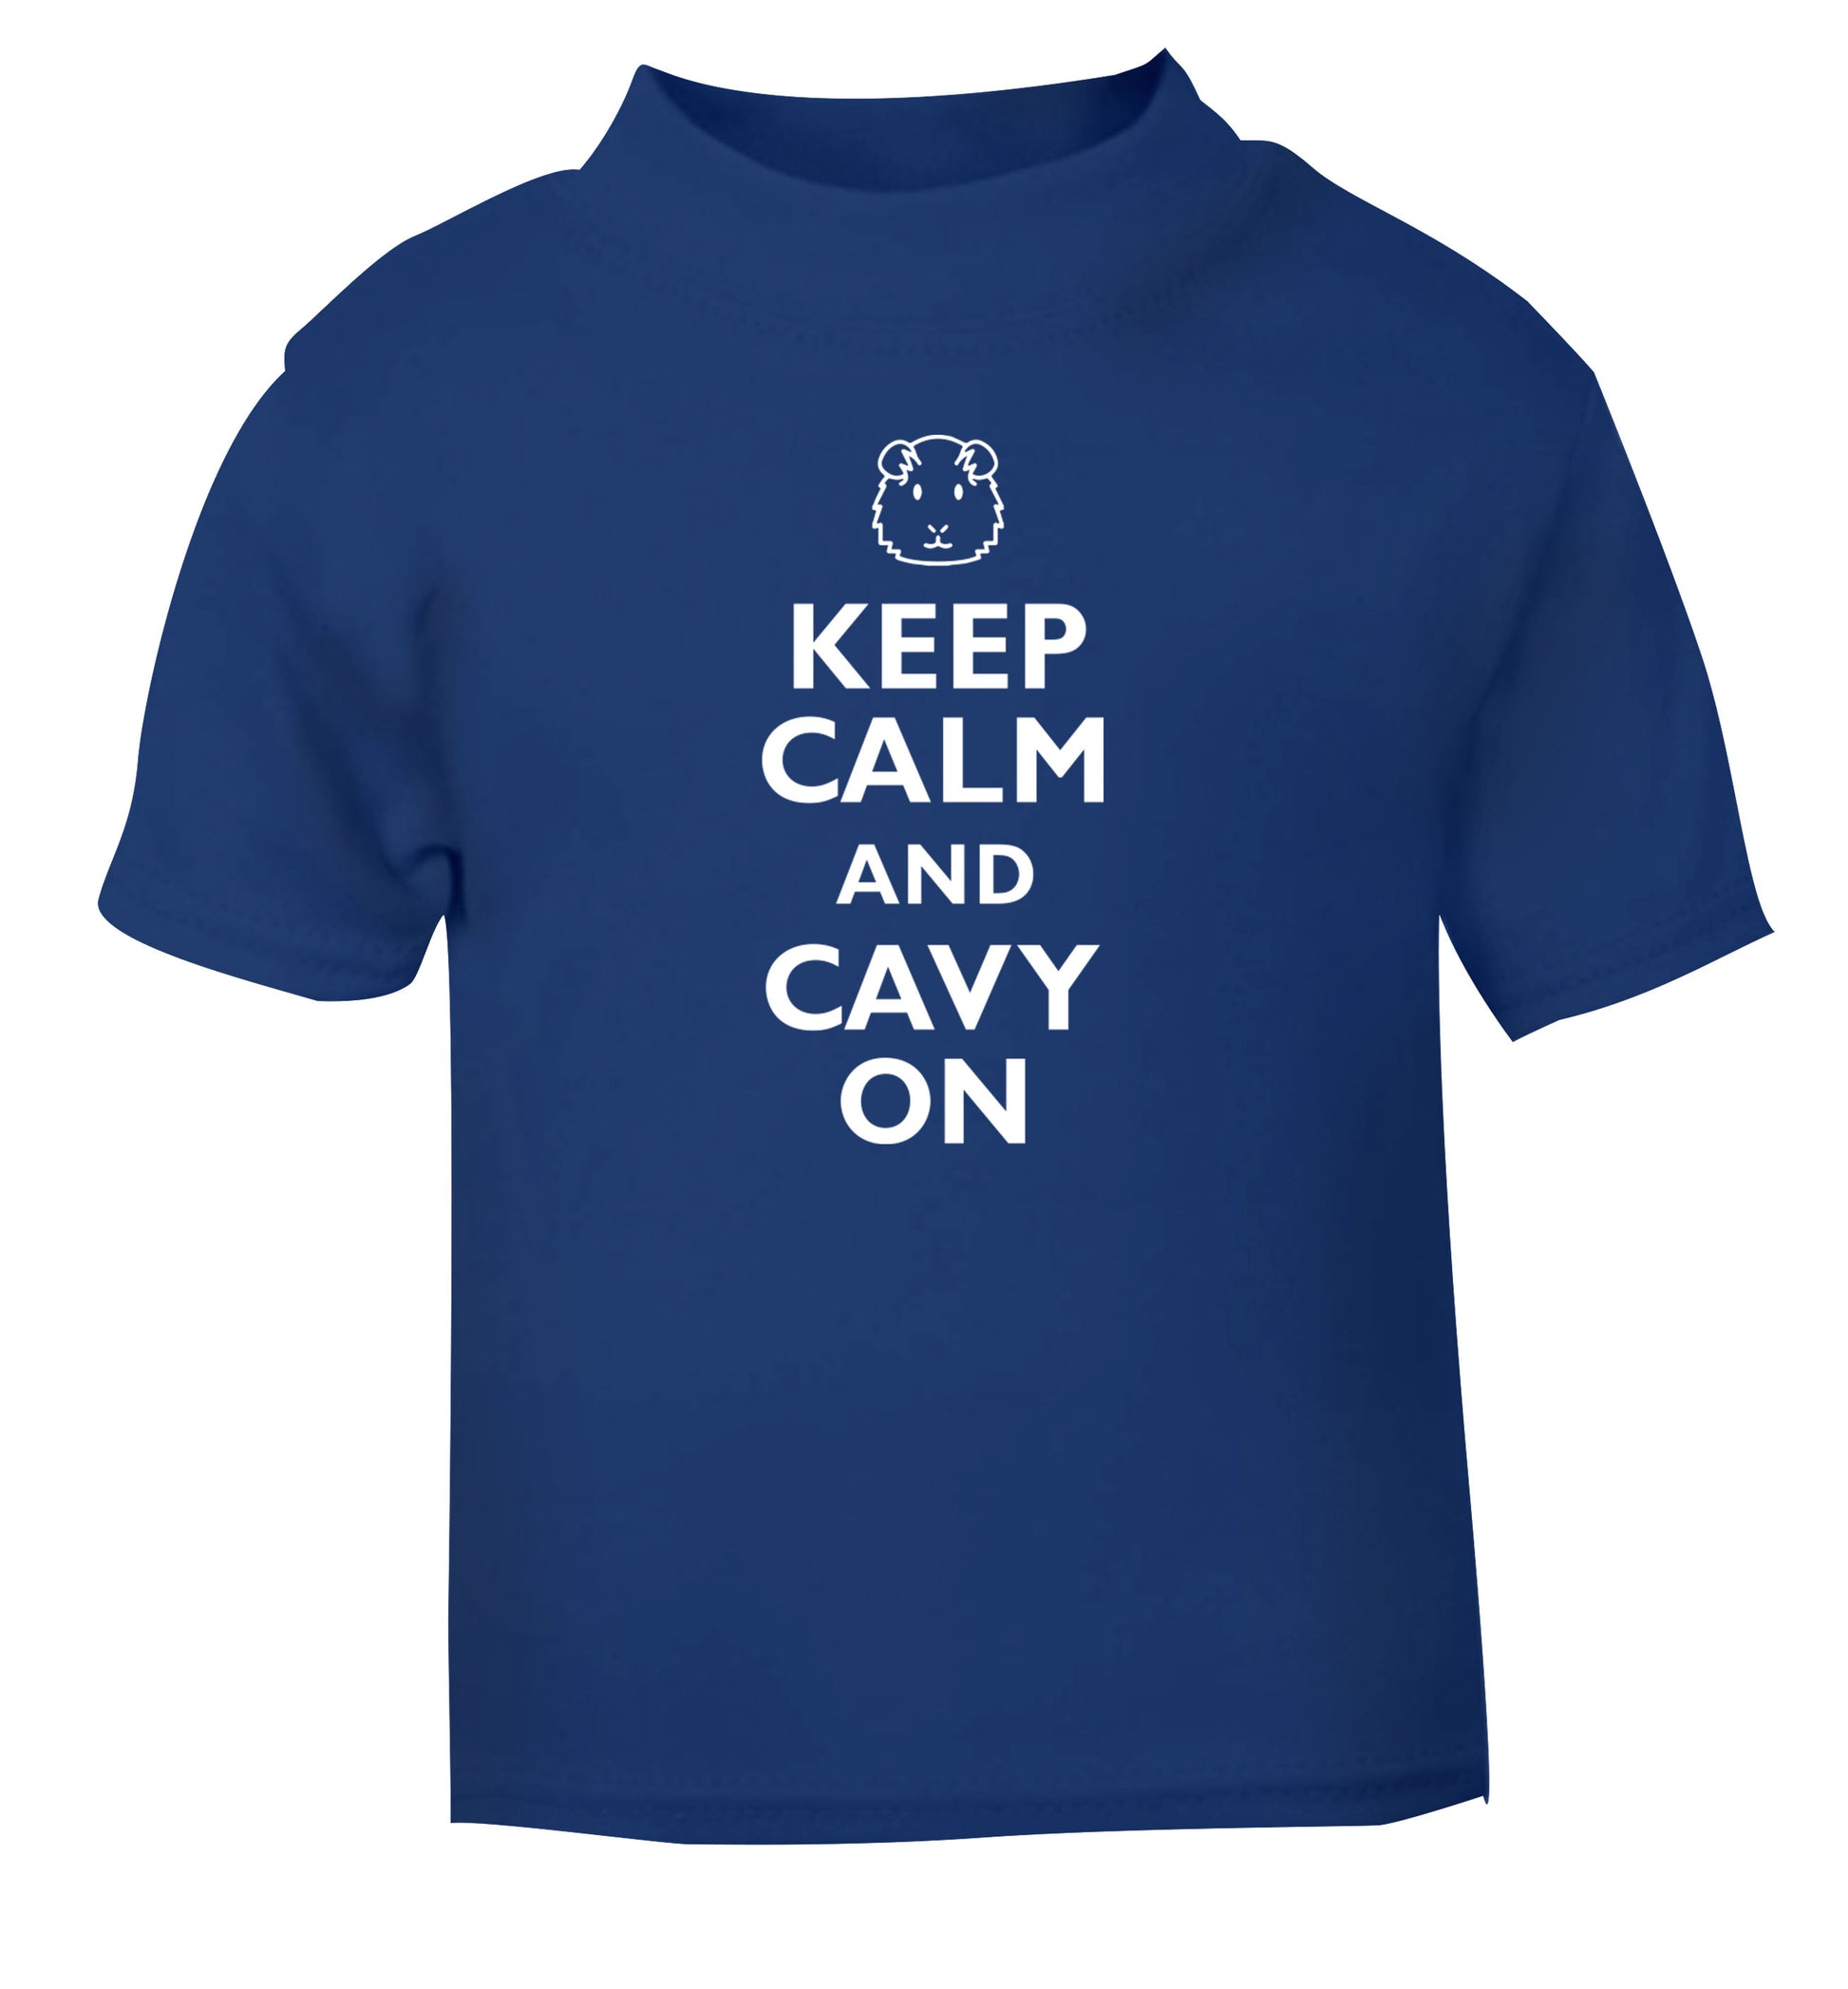 Keep calm and cavvy on blue Baby Toddler Tshirt 2 Years